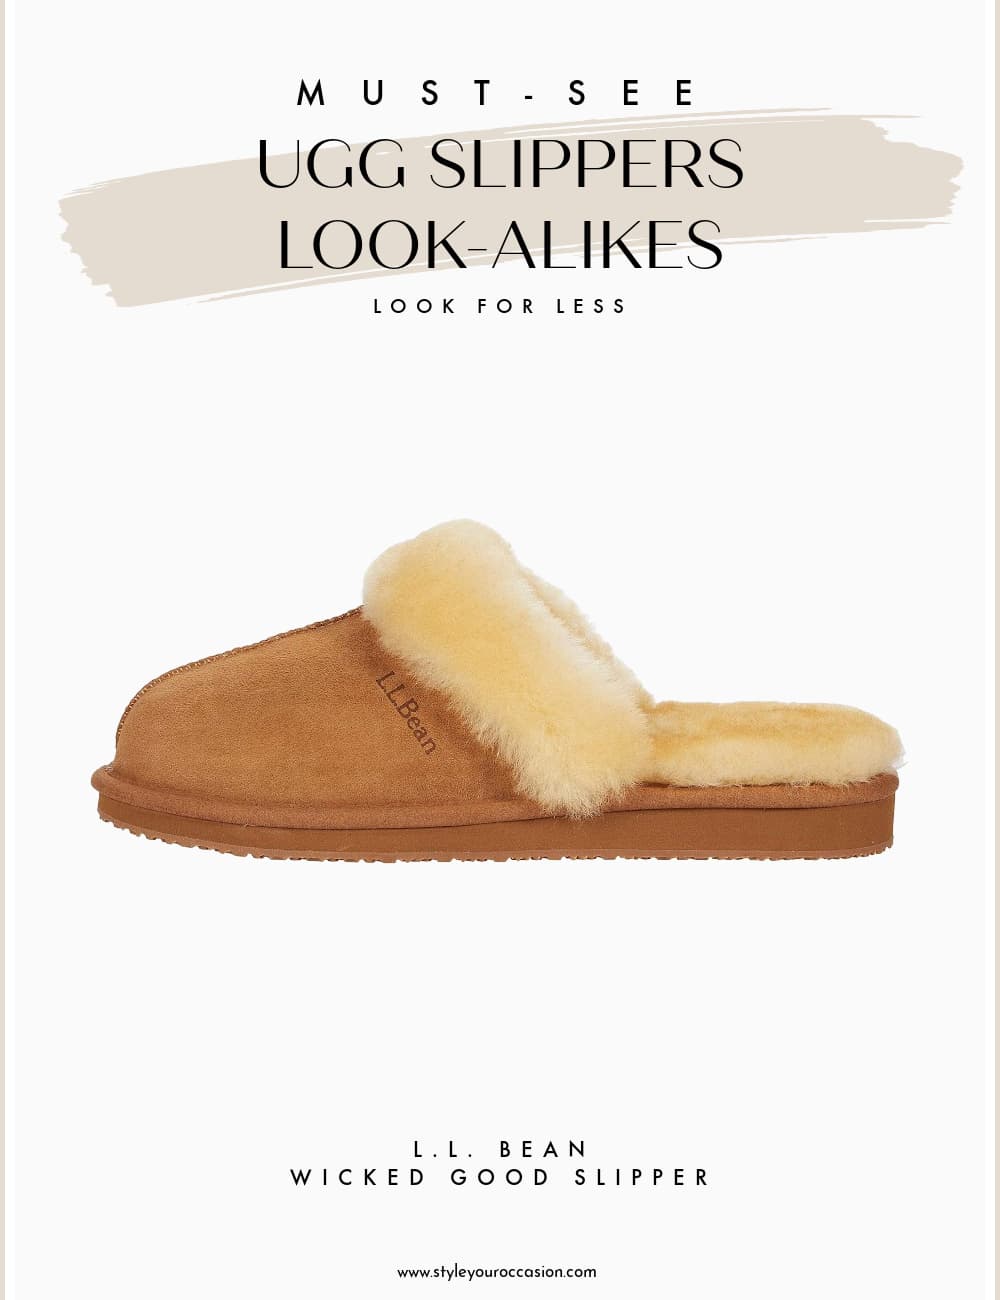 An image board of the Wicked Good slippers from L.L.Bean as a dupe for Ugg Tazman slippers